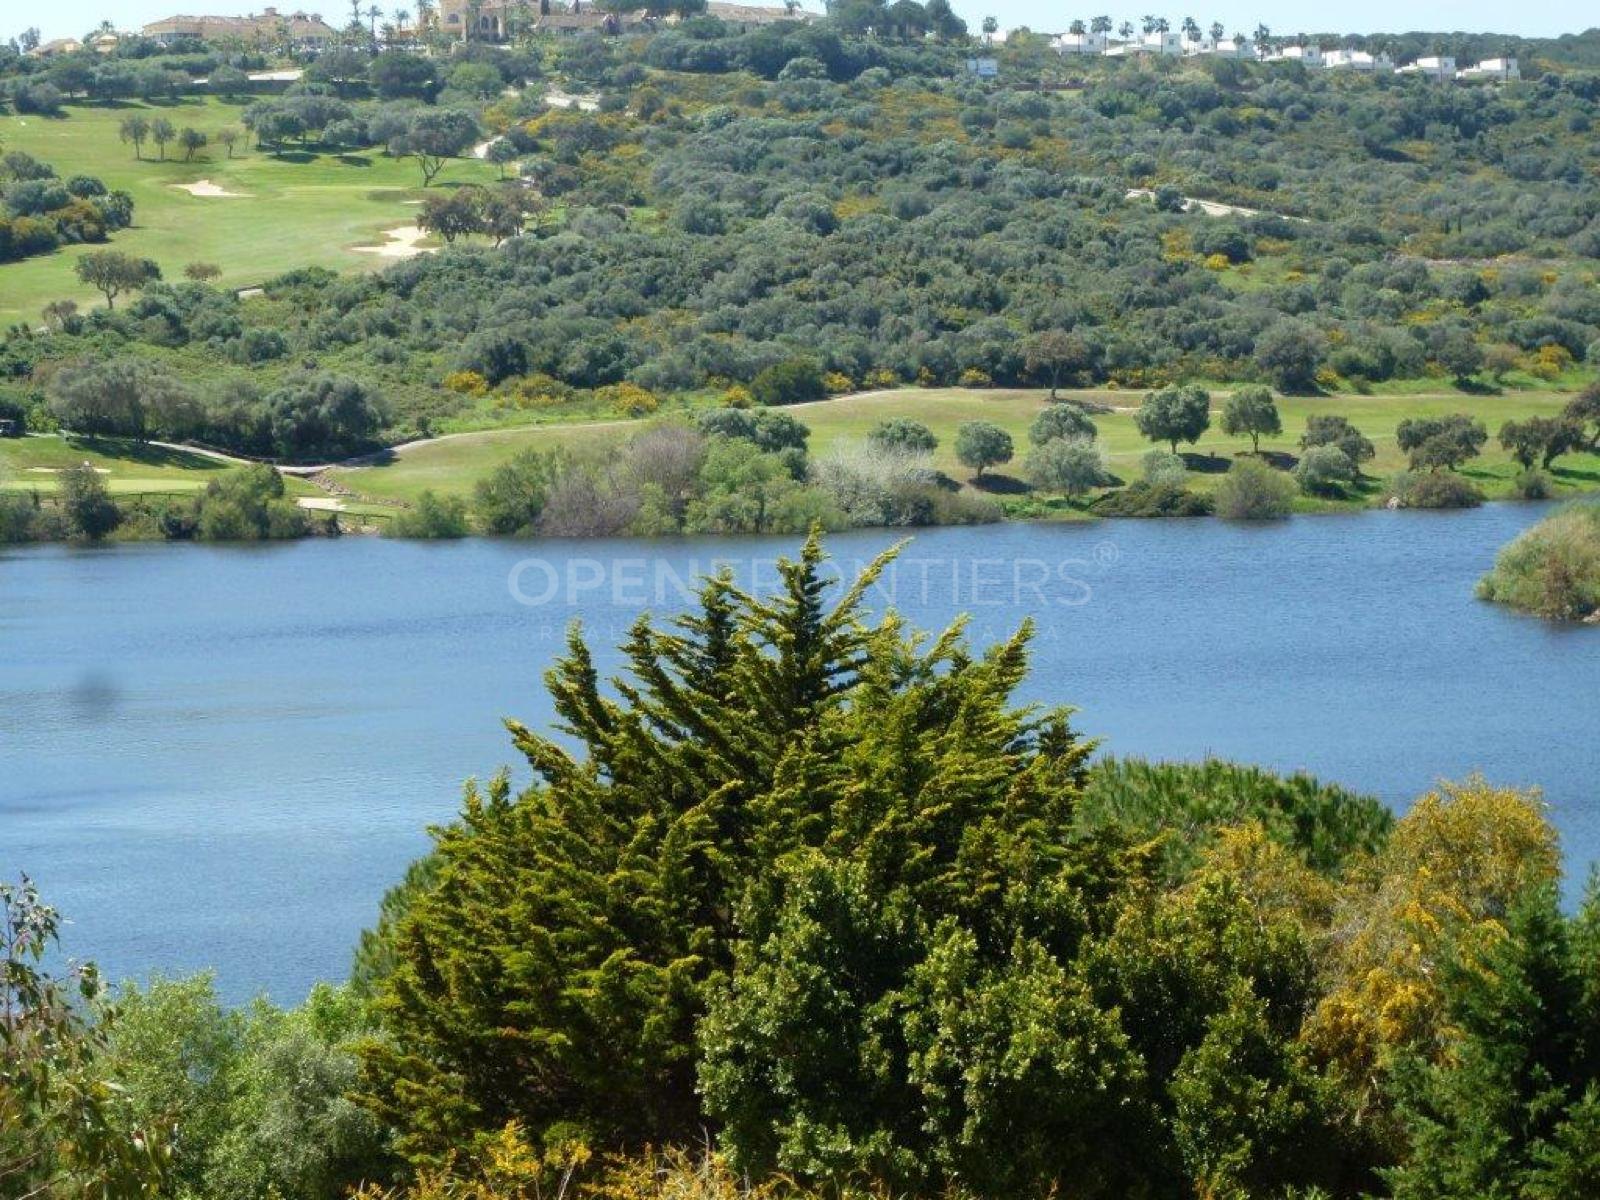 Plot with Stunning Views in Sotogrande Alto